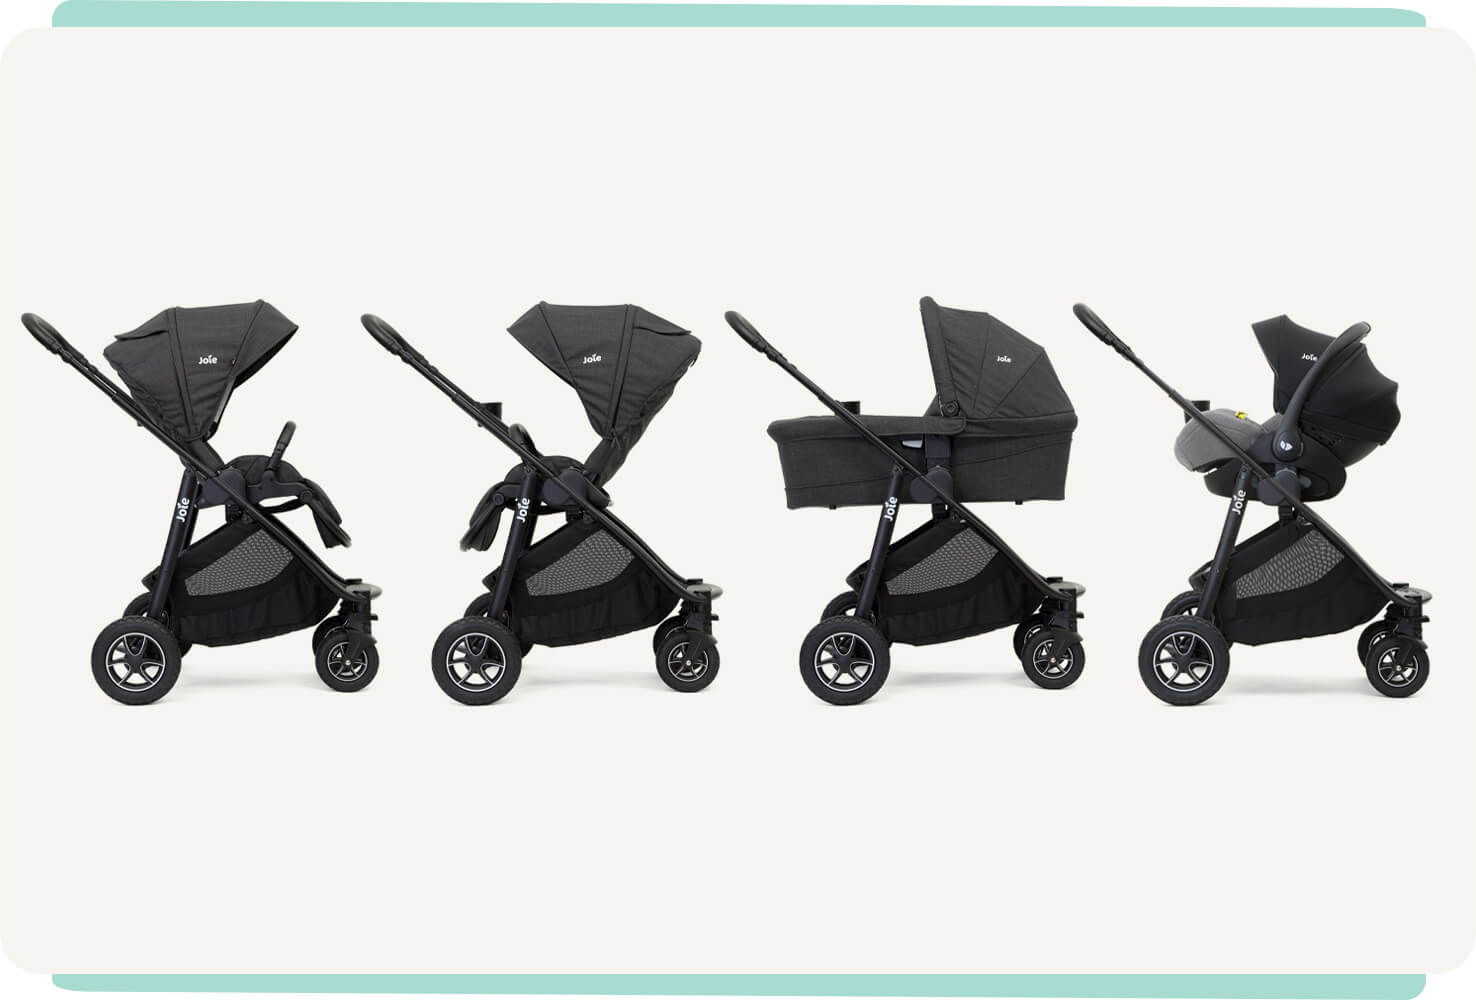 Four light green and black Joie versatrax prams displaying the different pushchair modes.